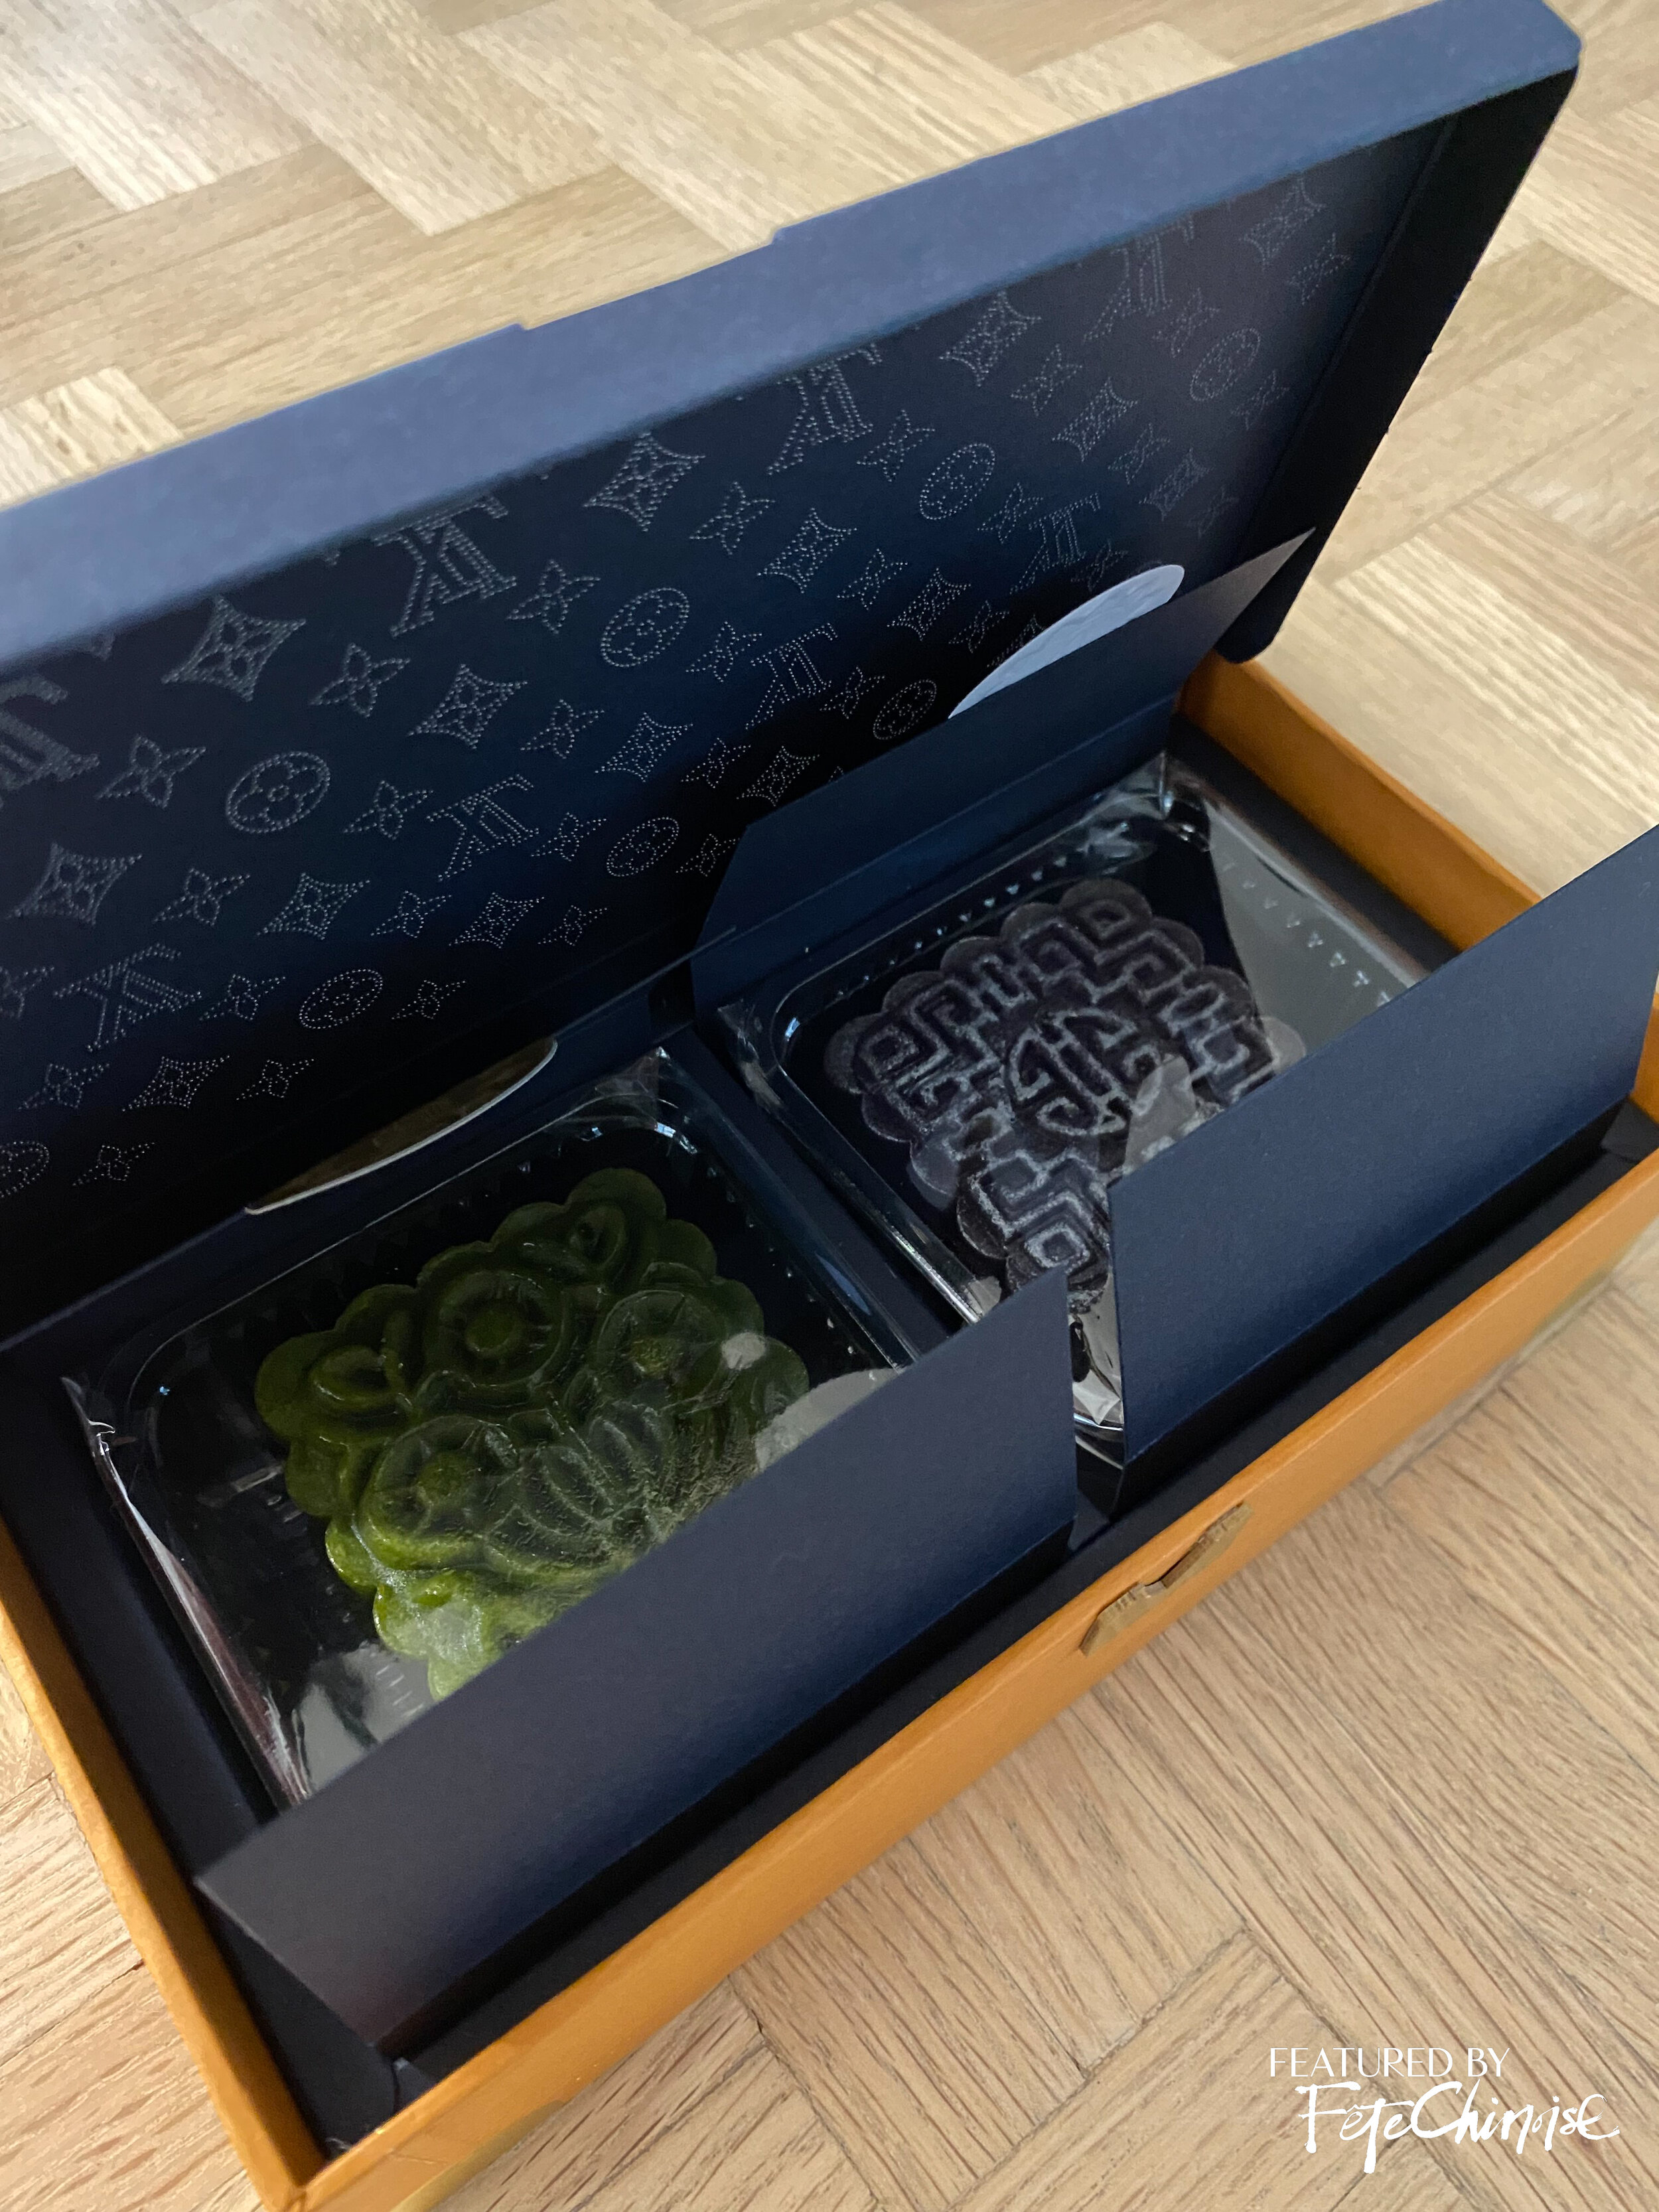 Luxury brand mid-autumn mooncake-chinese culture-2021-chinese food-tradition5.jpg